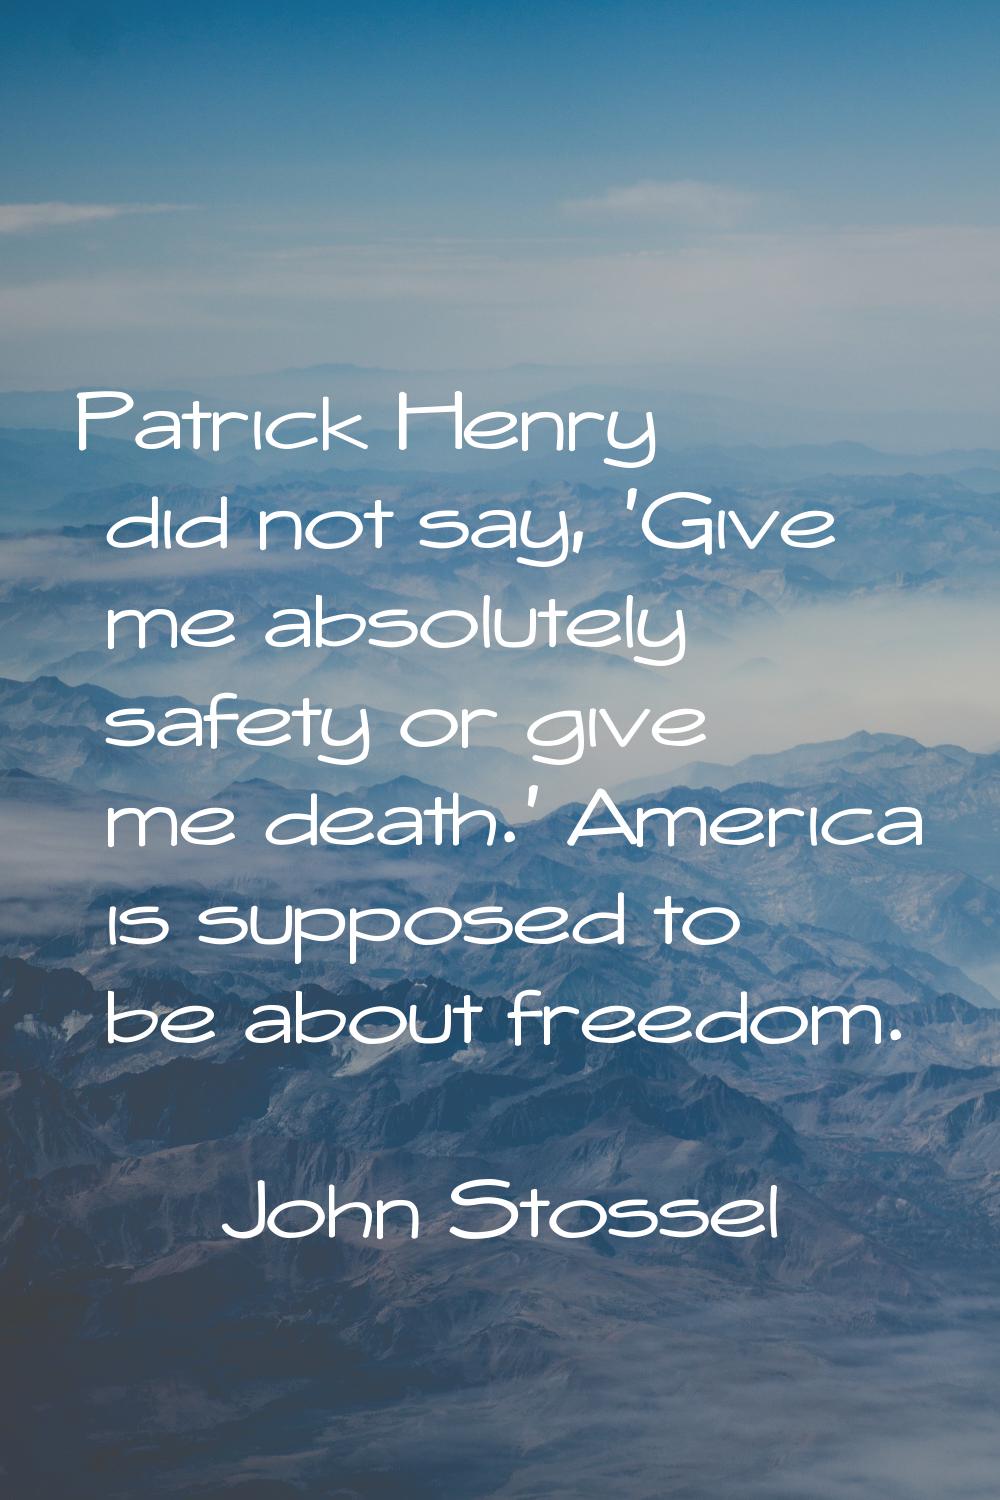 Patrick Henry did not say, 'Give me absolutely safety or give me death.' America is supposed to be 